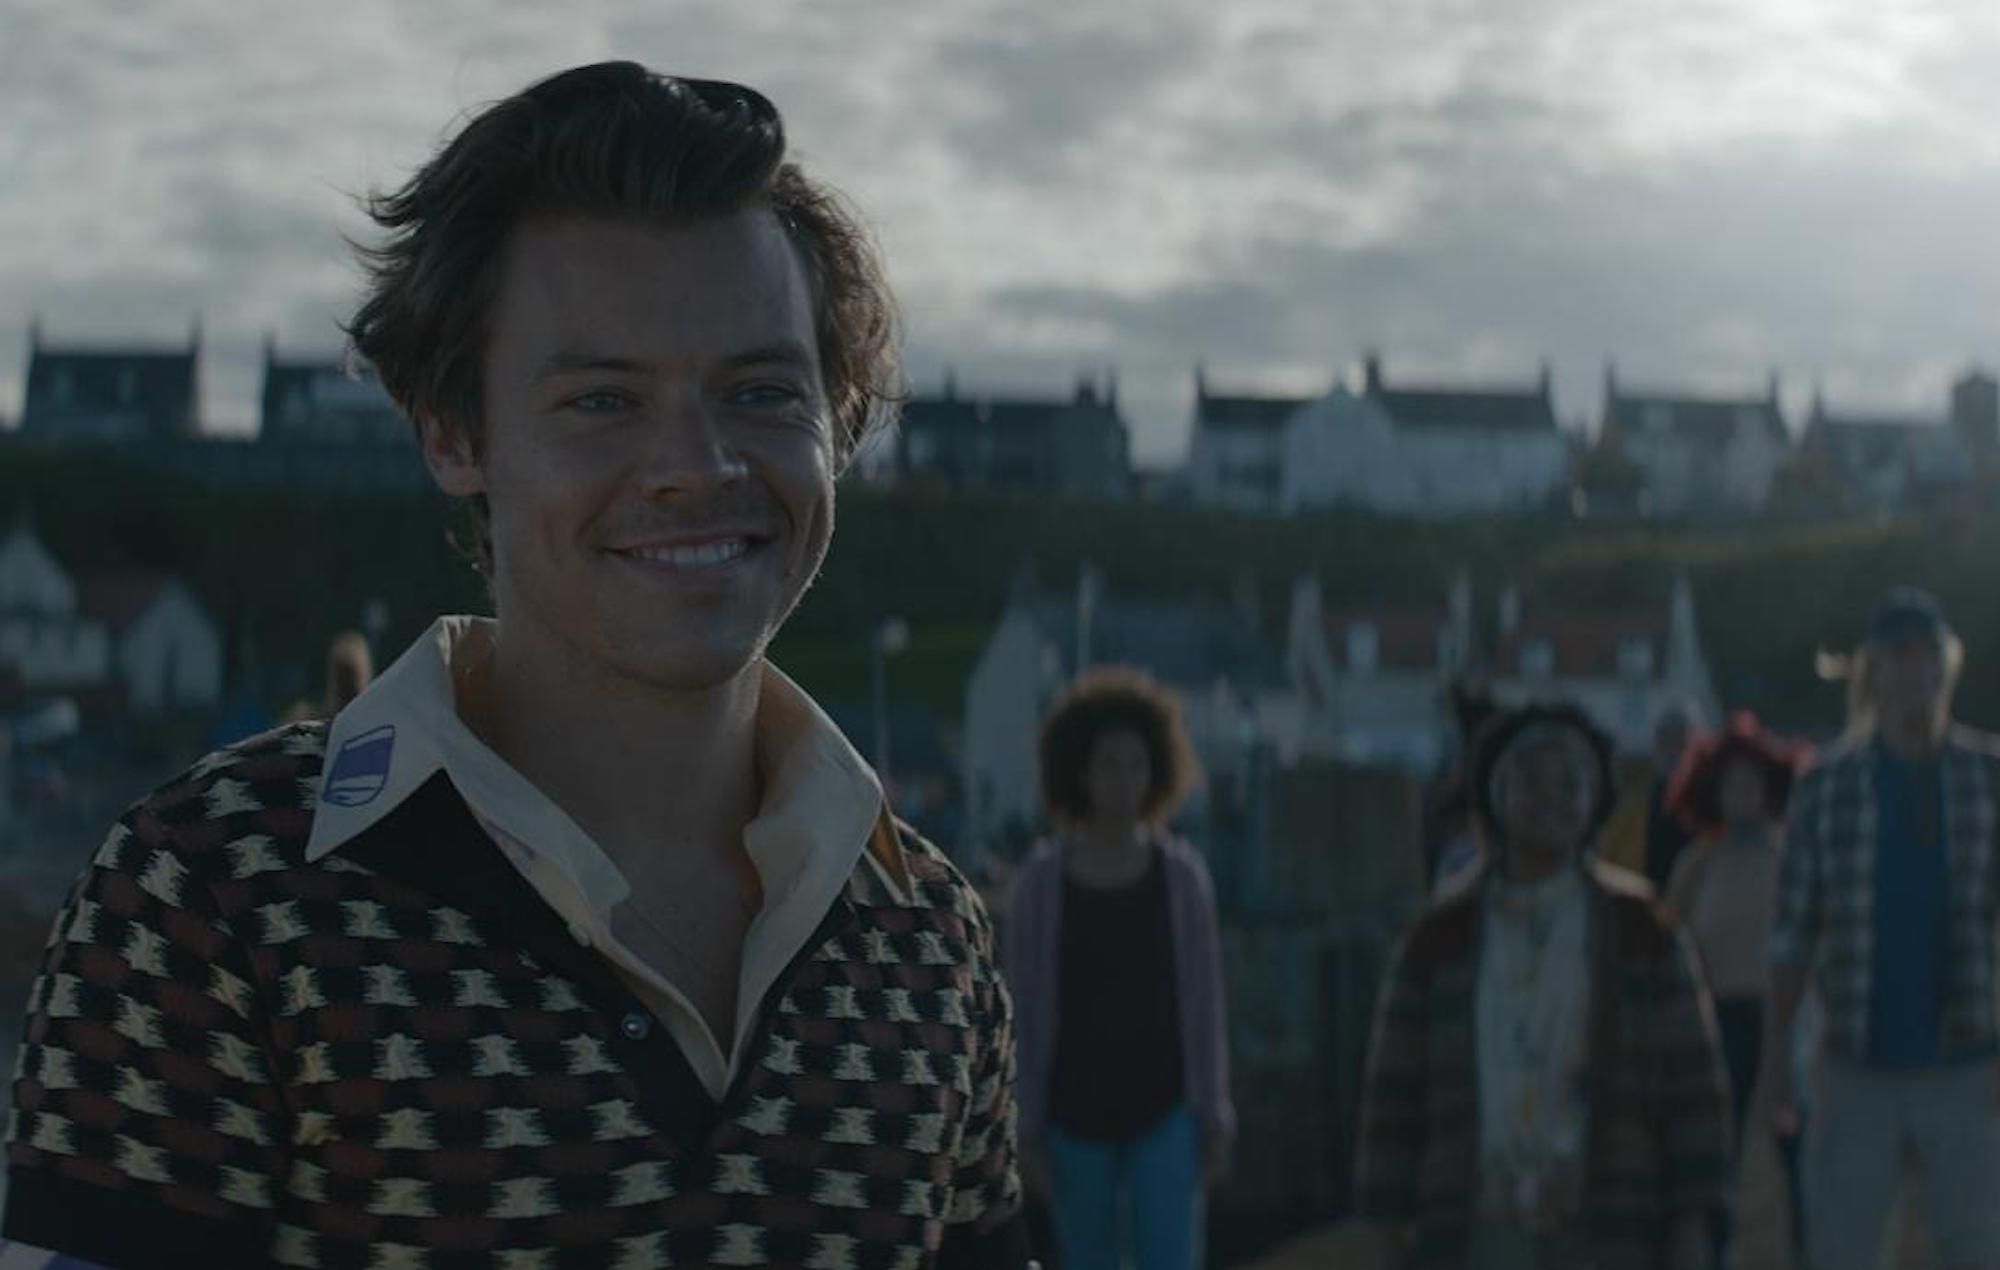 Harry Styles' fishy 'Adore You' video is one of the year's weirdest but also strangely beautiful